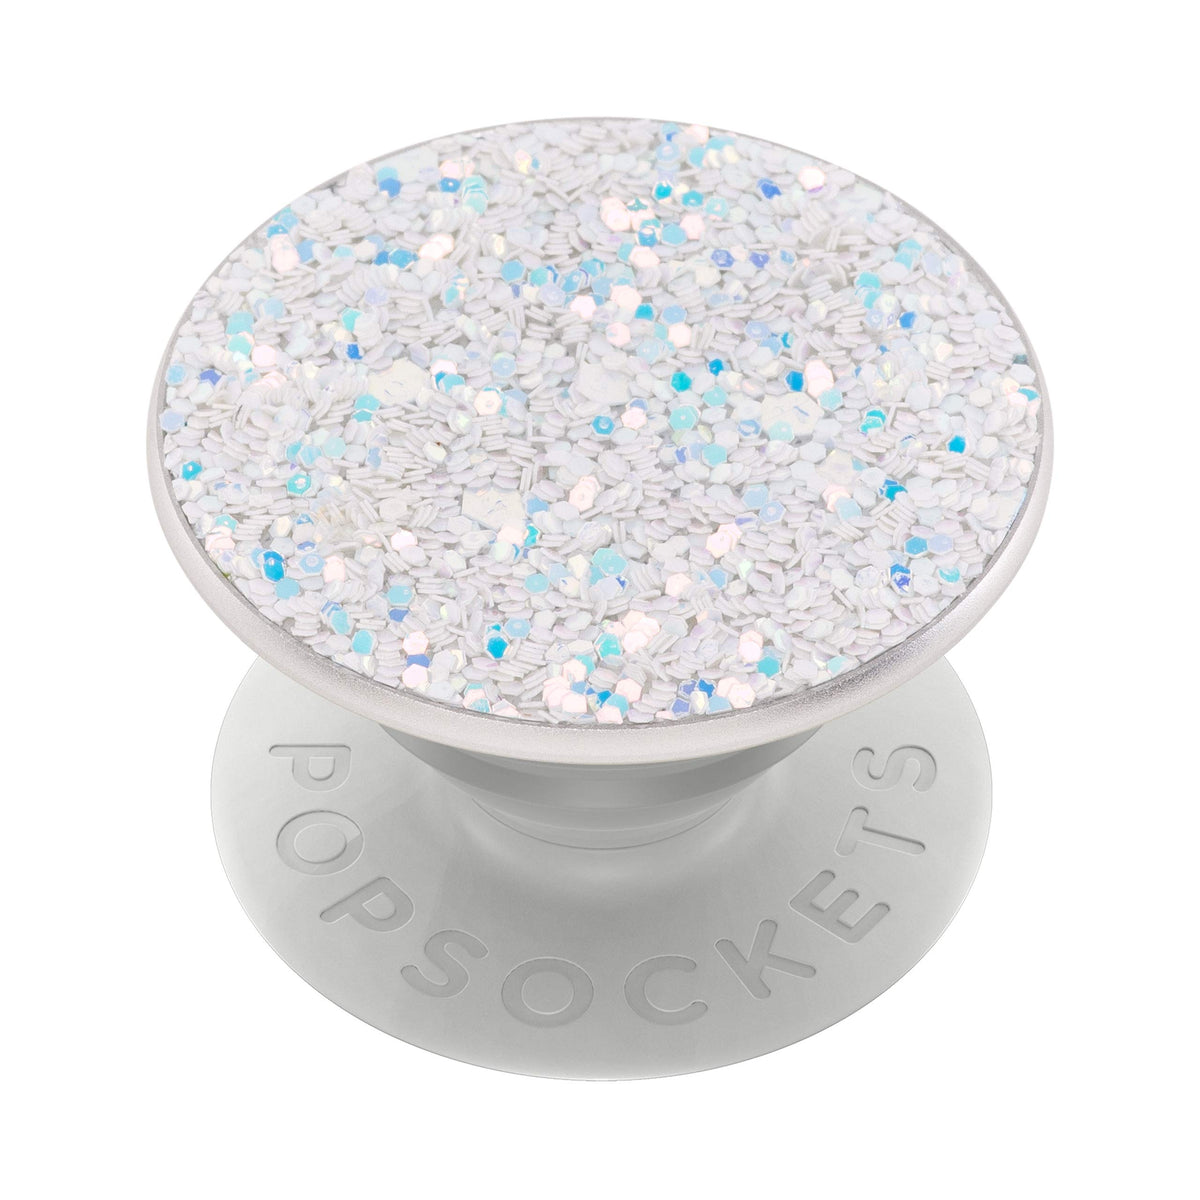 PopSockets PopGrip -All Smartphones and Tablets, Nintendo Switch, Kindle E-reader, Ipad Expanding Stand and Grip with Swappable Top - Sparkle Snow White,Water proof